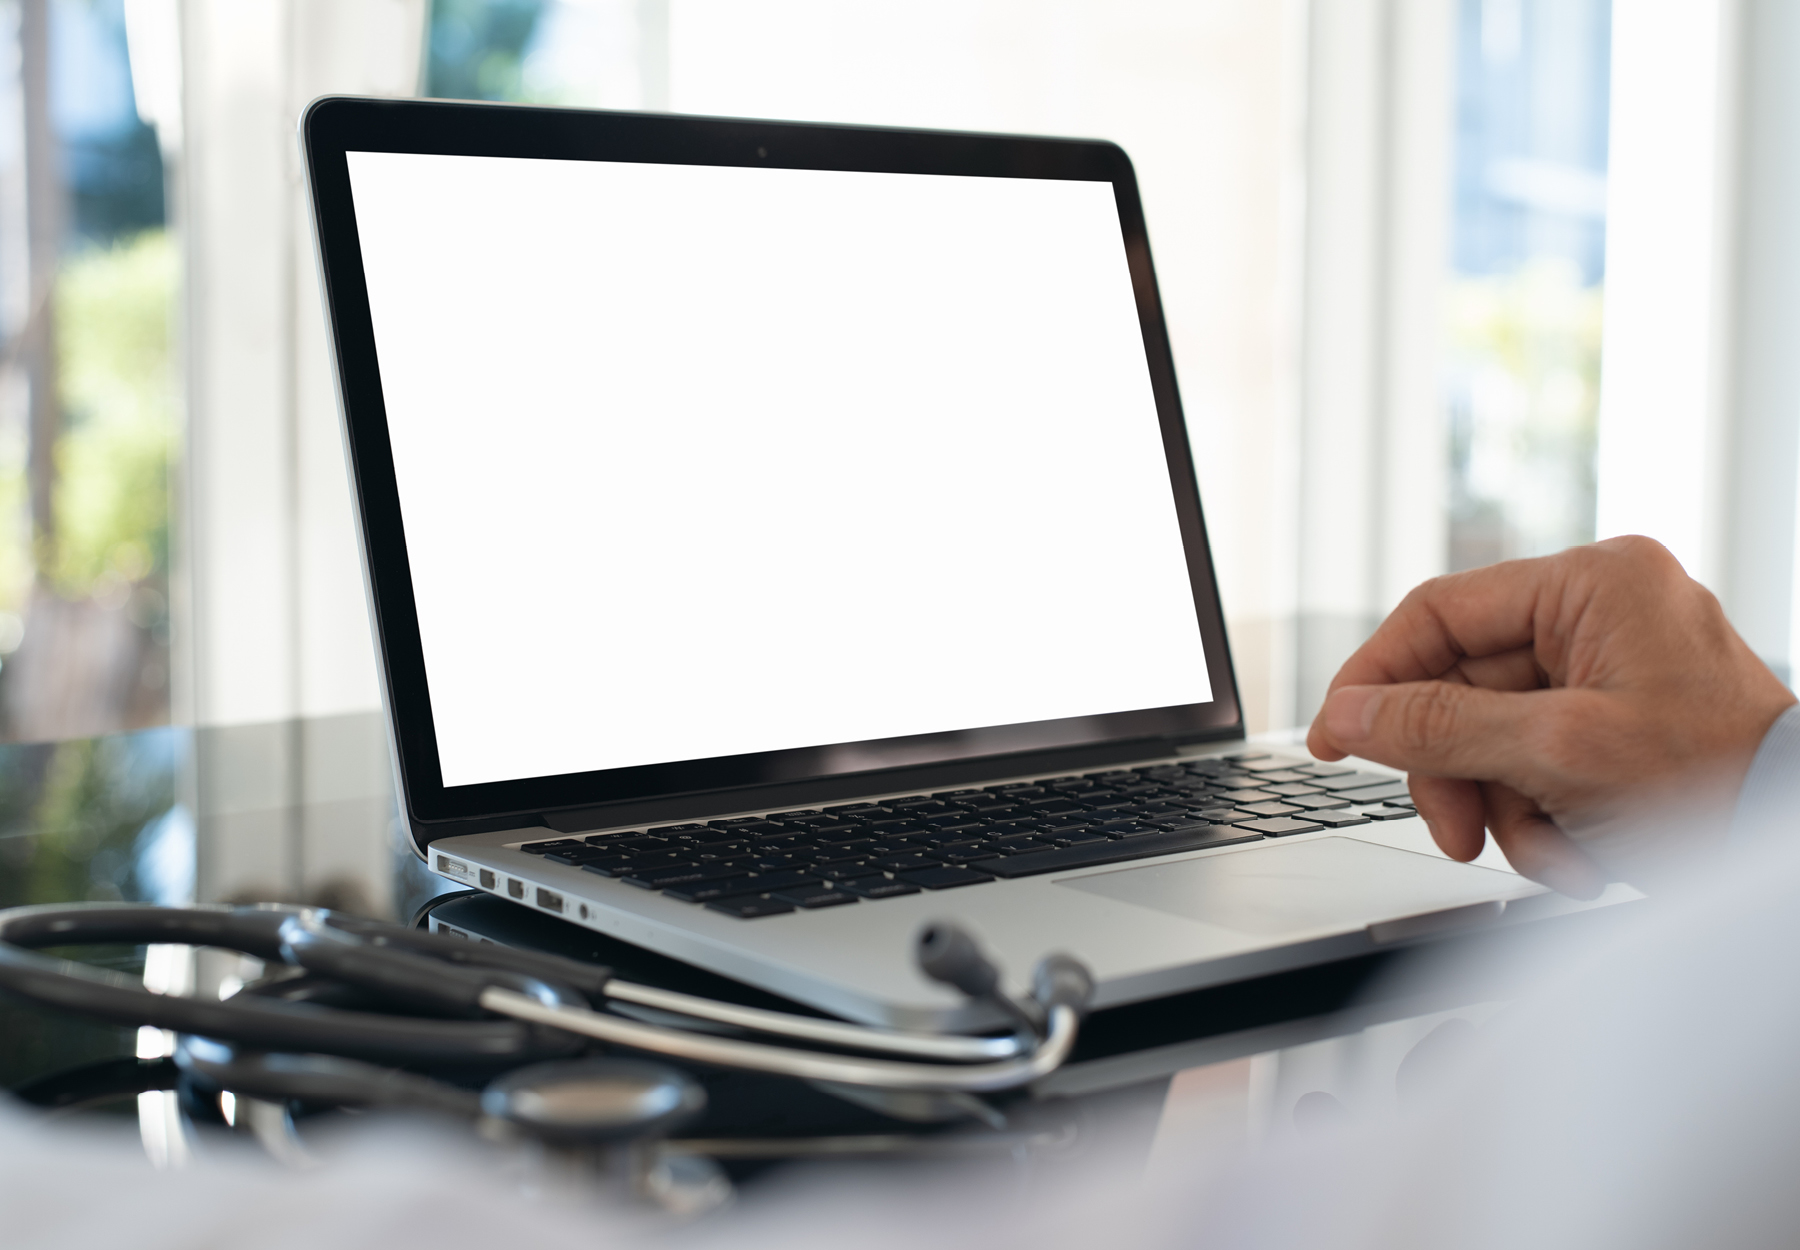 Doctor working on blank screen laptop computer in modern doctor office with stethoscope and notebook on desk. iStock image.